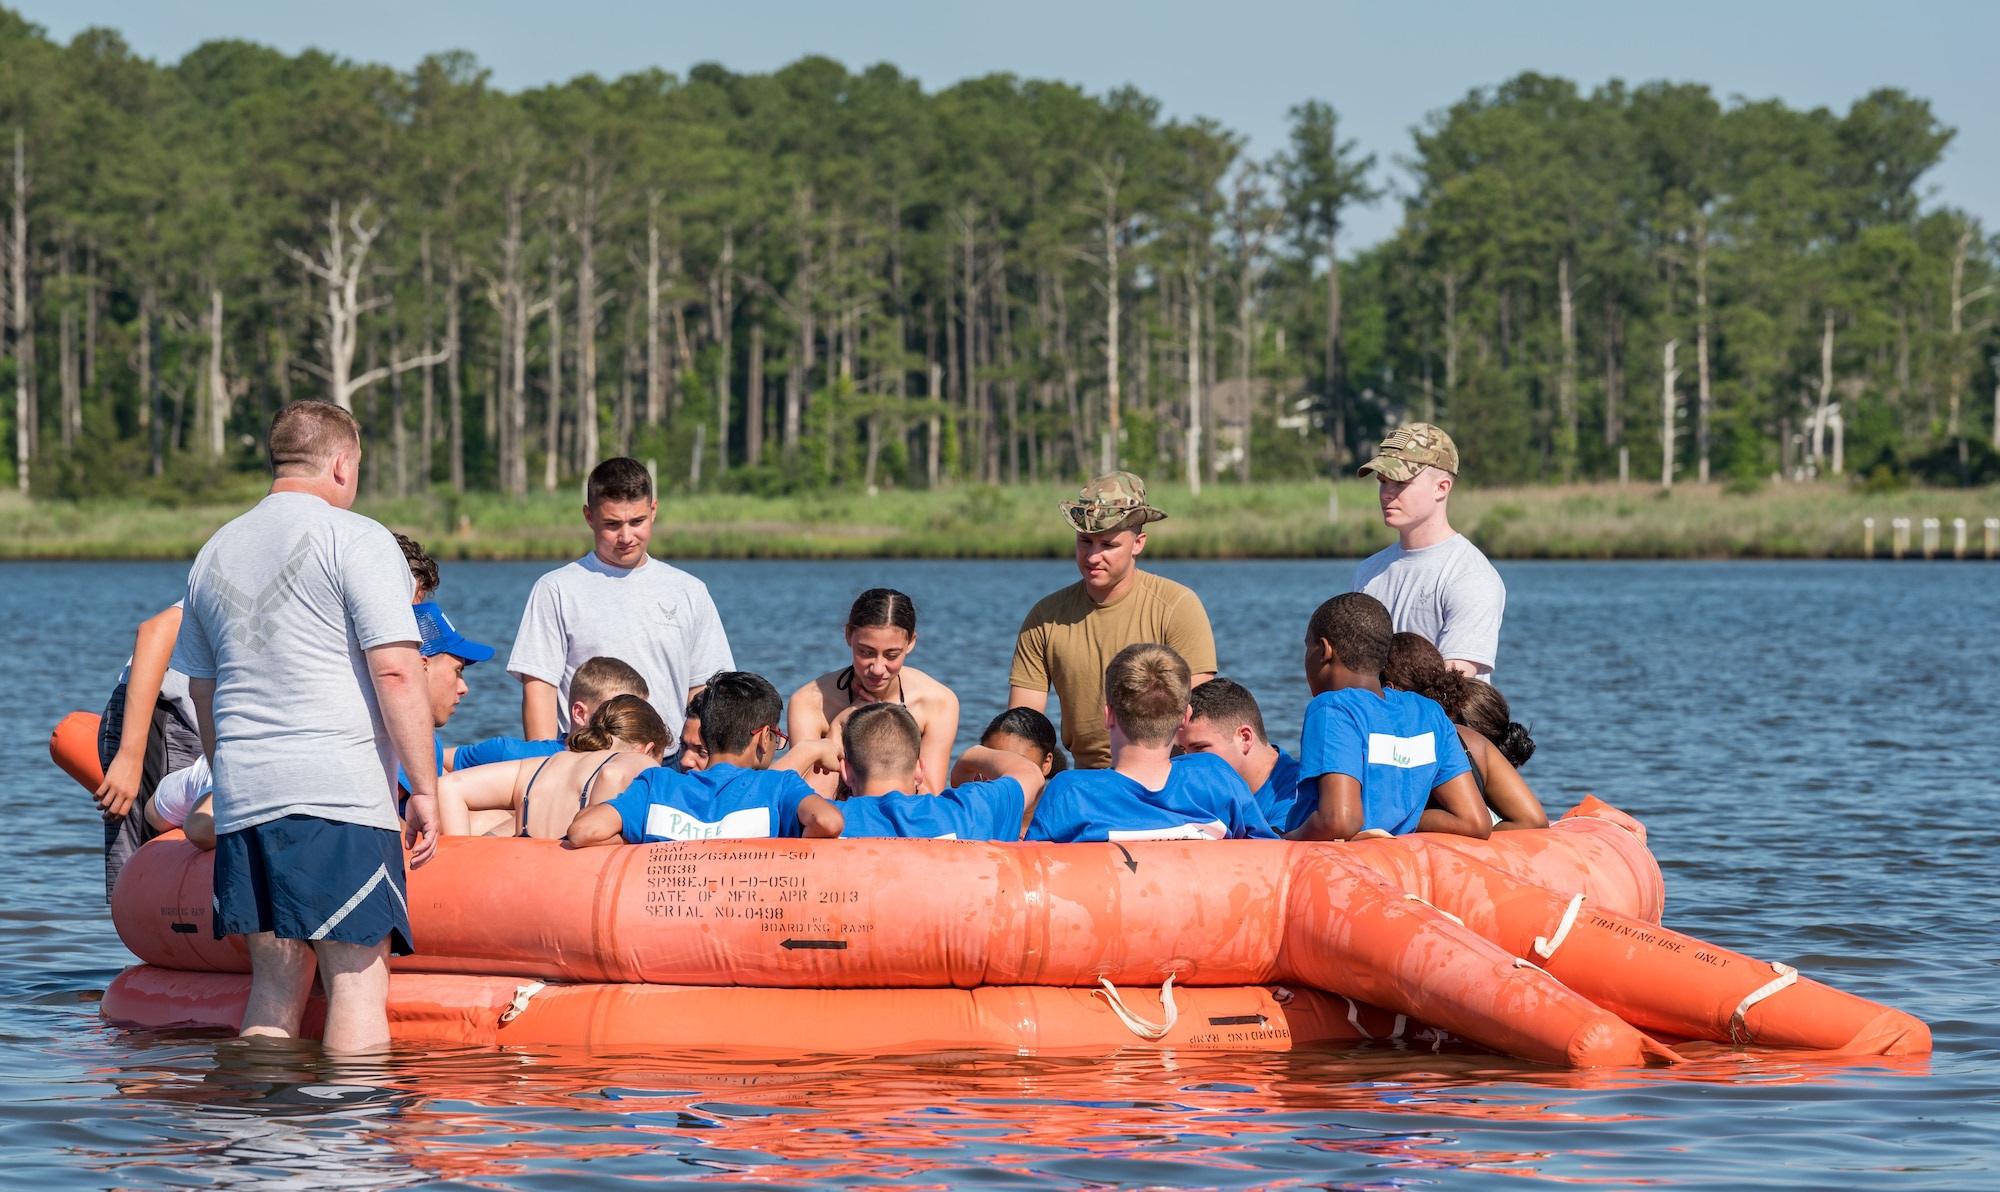 Members of the 142nd Airlift Squadron, New Castle Air National Guard Base, New Castle, Del., teach aircrew water survival skills to Air Force Junior Reserve Officers’ Training Corps cadets of Bandit Flight June 17, 2019, at the Delaware National Guard Bethany Beach Training Site, Bethany Beach, Del. Cadets climbed into a 20-person life raft on the first day of the six-day Cadet Leadership Course. (U.S. Air Force photo by Roland Balik)